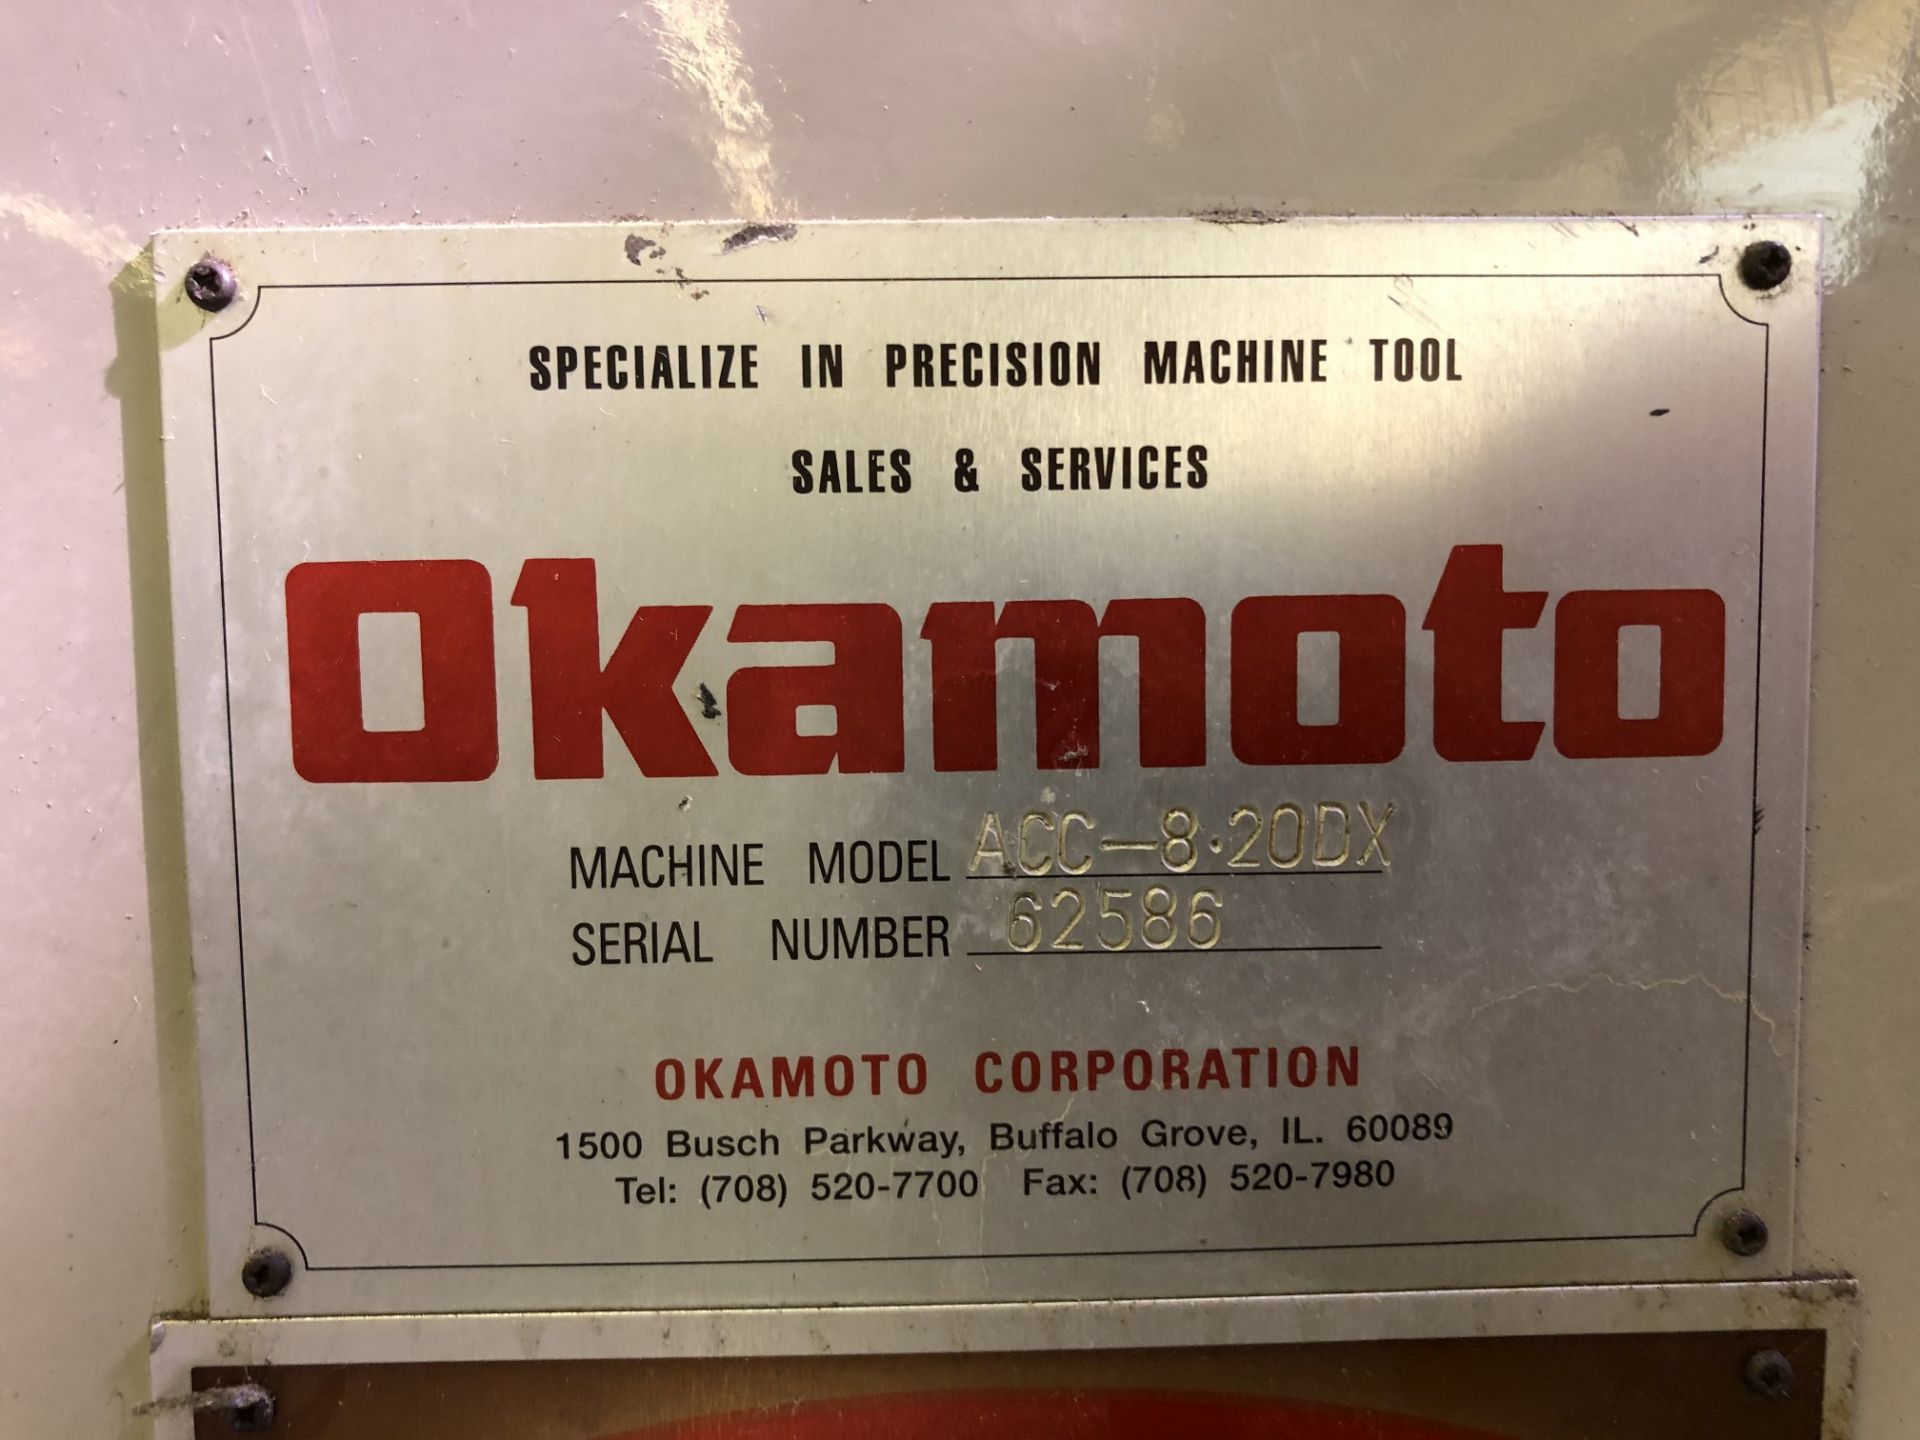 Okamoto ACC-8-20DX Surface Grinder, 8" x 20" Electro Magnetic Chuck, S/N 62586 (SPT #213) - Image 7 of 10